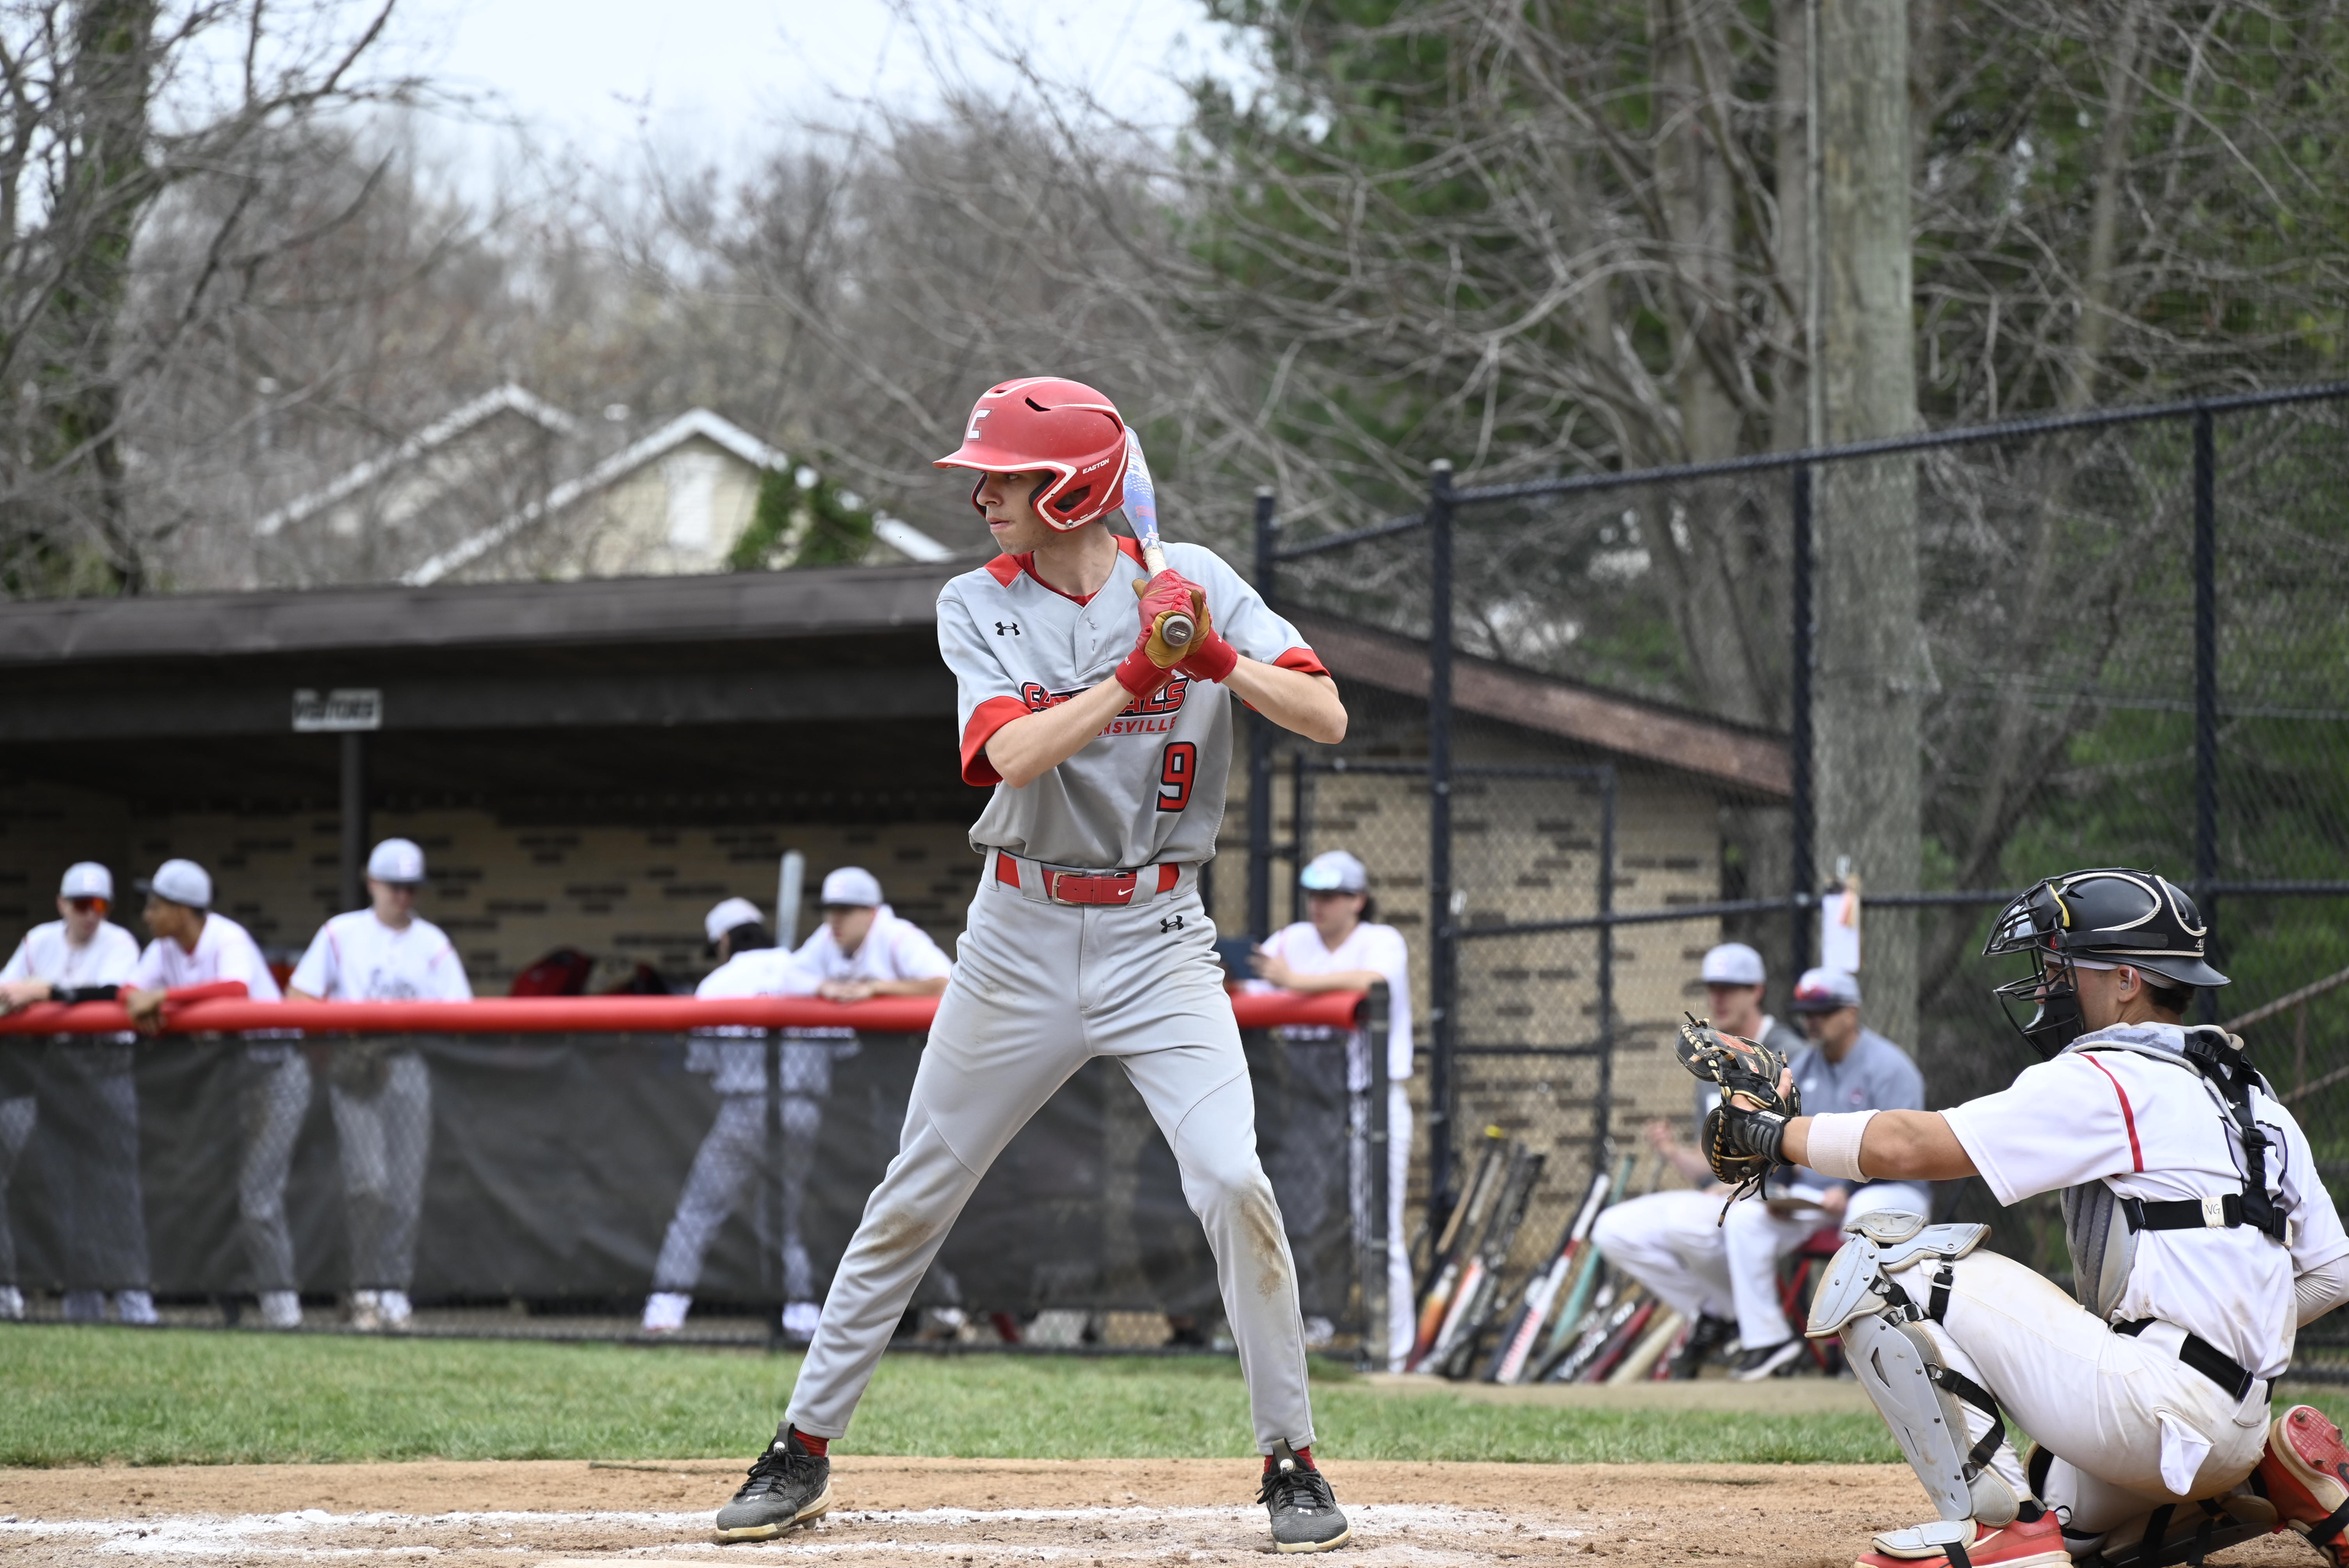 CCBC Catonsville vs Allegany College of Maryland Game 1 Recap